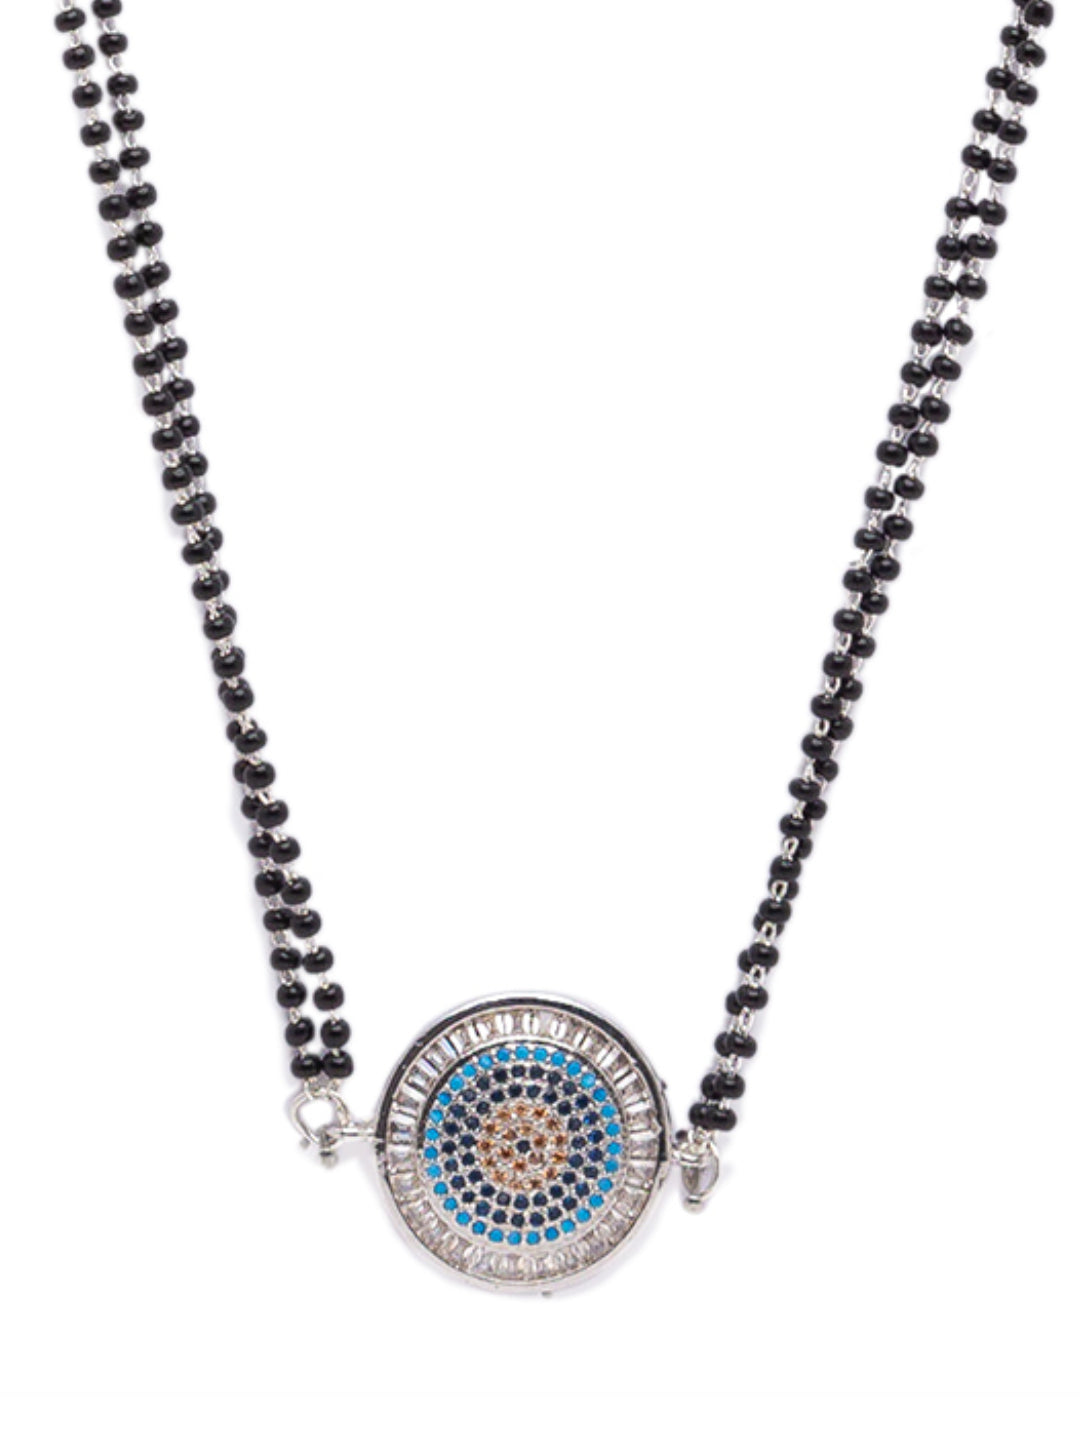 The Evil Eye Necklace Long Silver Mangalsutra Design Brass Silver Plated AD Pendant मंगळसूत्र (25 Inch)